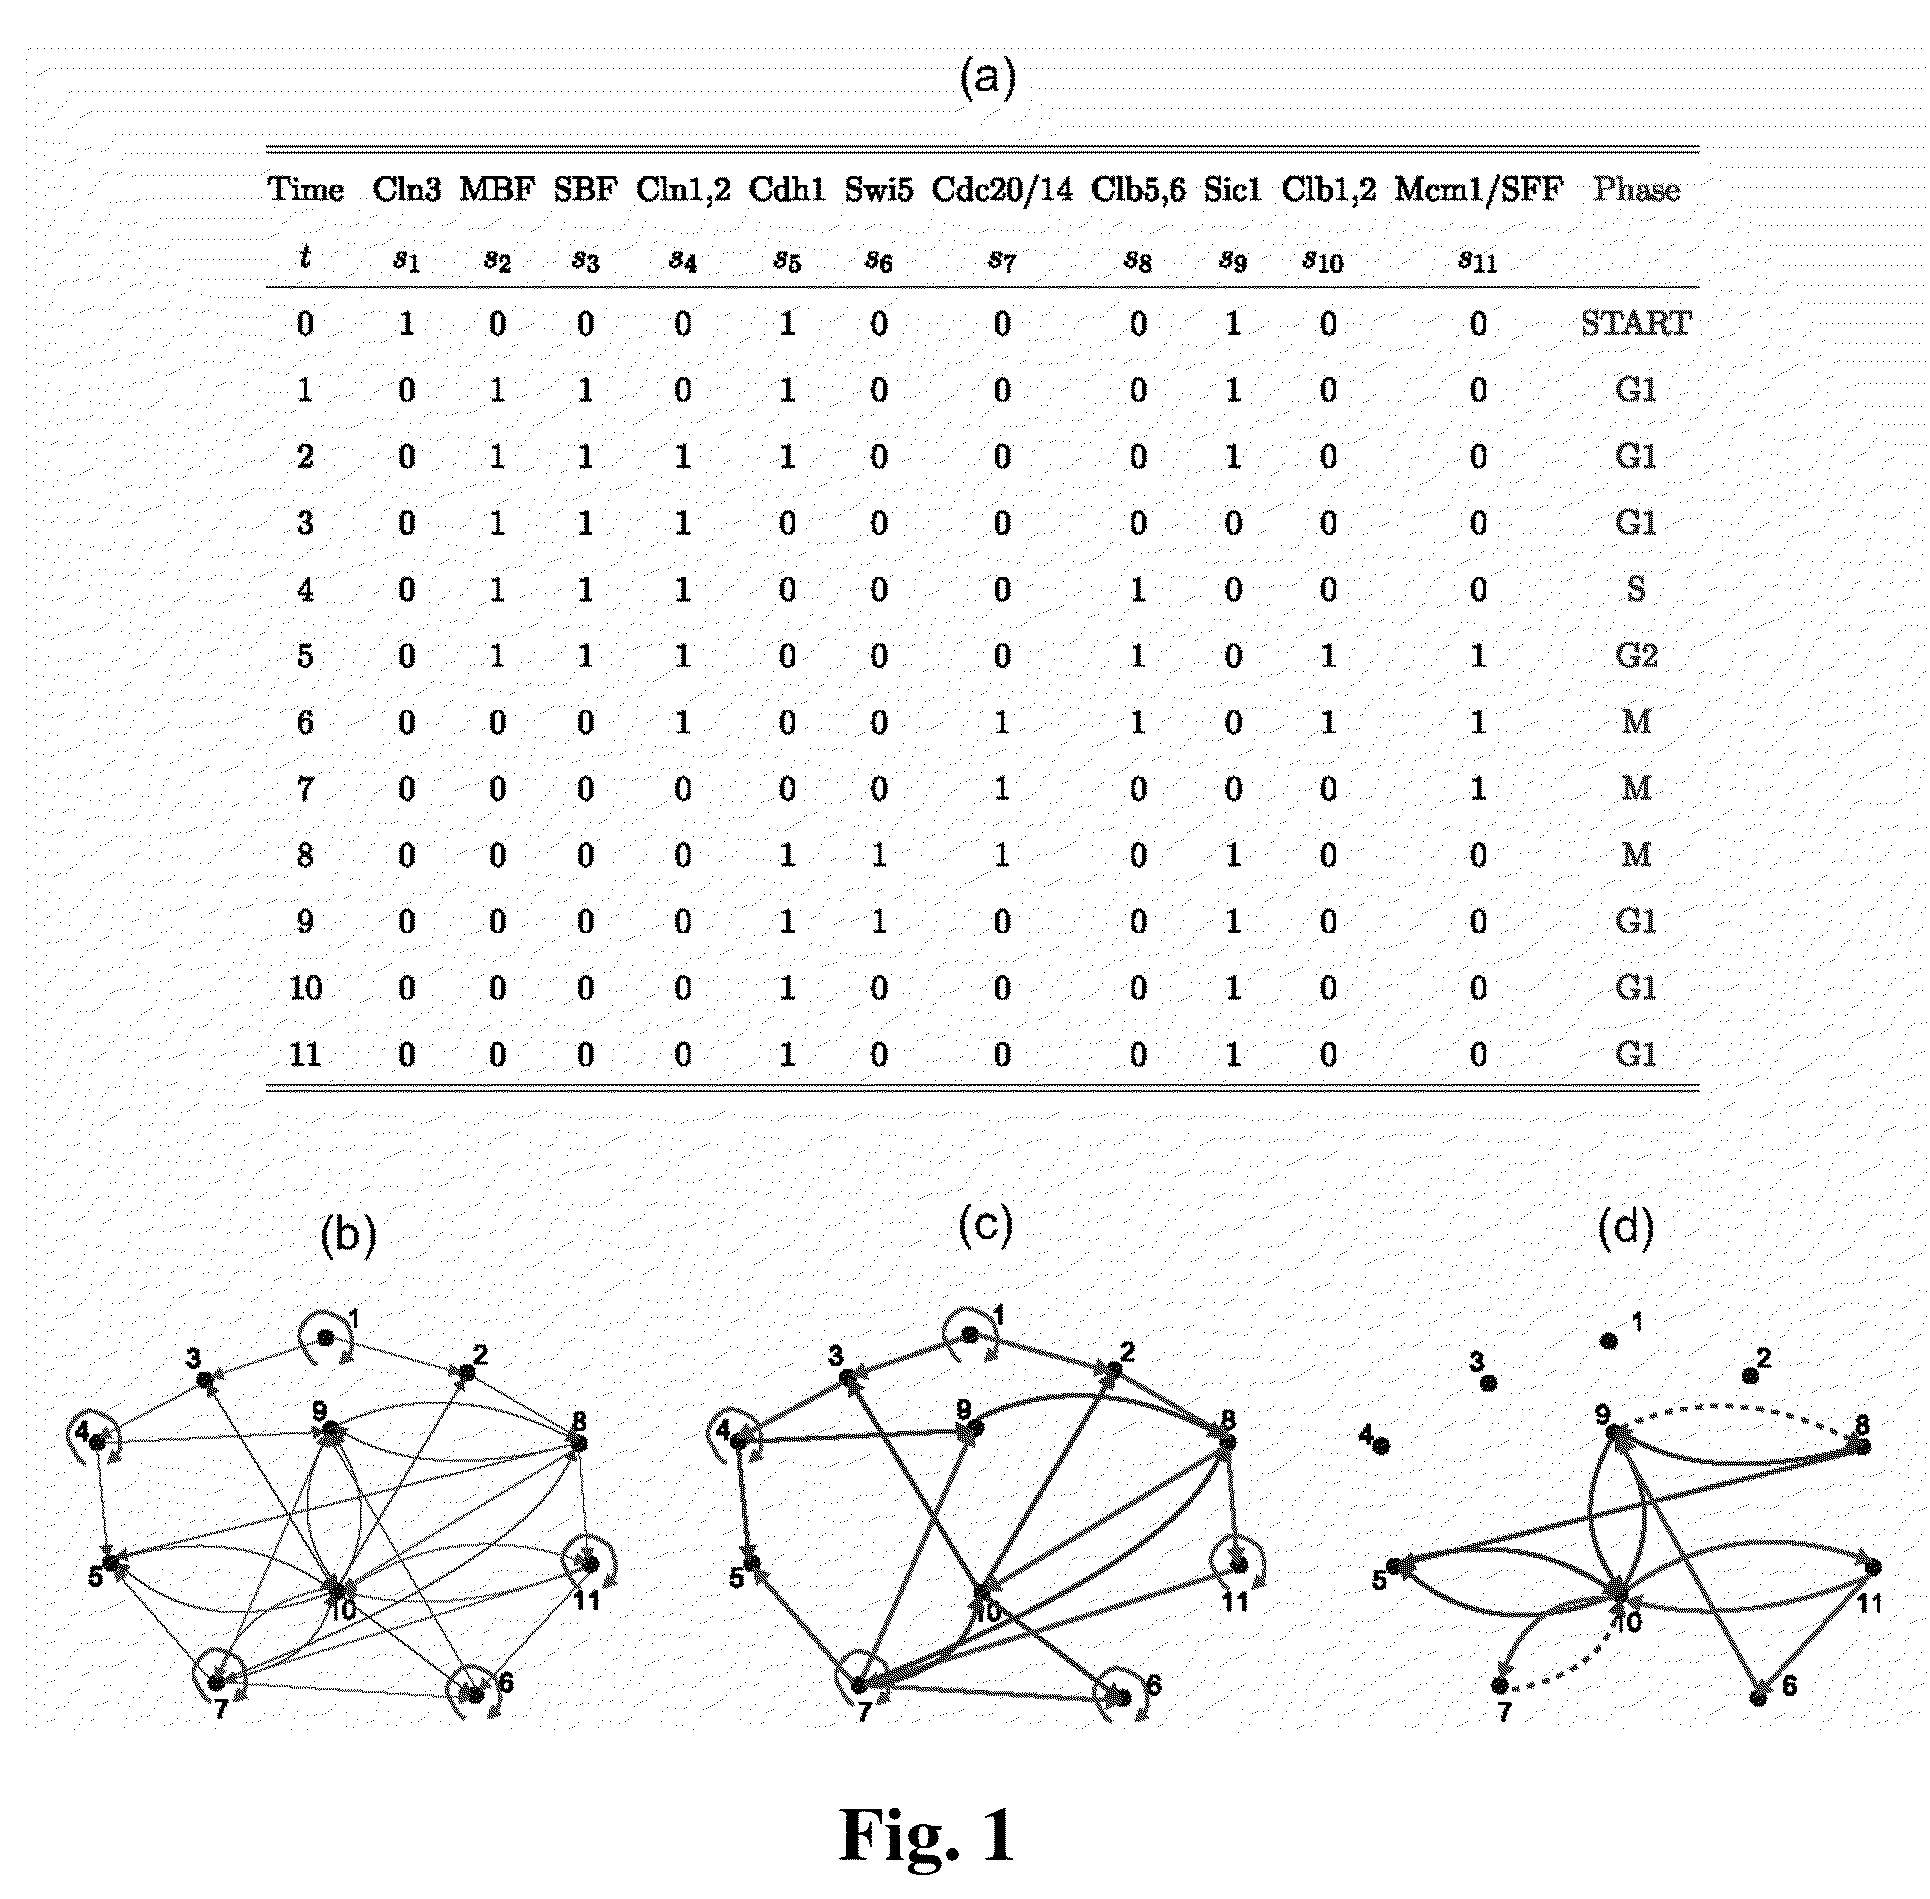 System and method for obtaining information about biological networks using a logic based approach